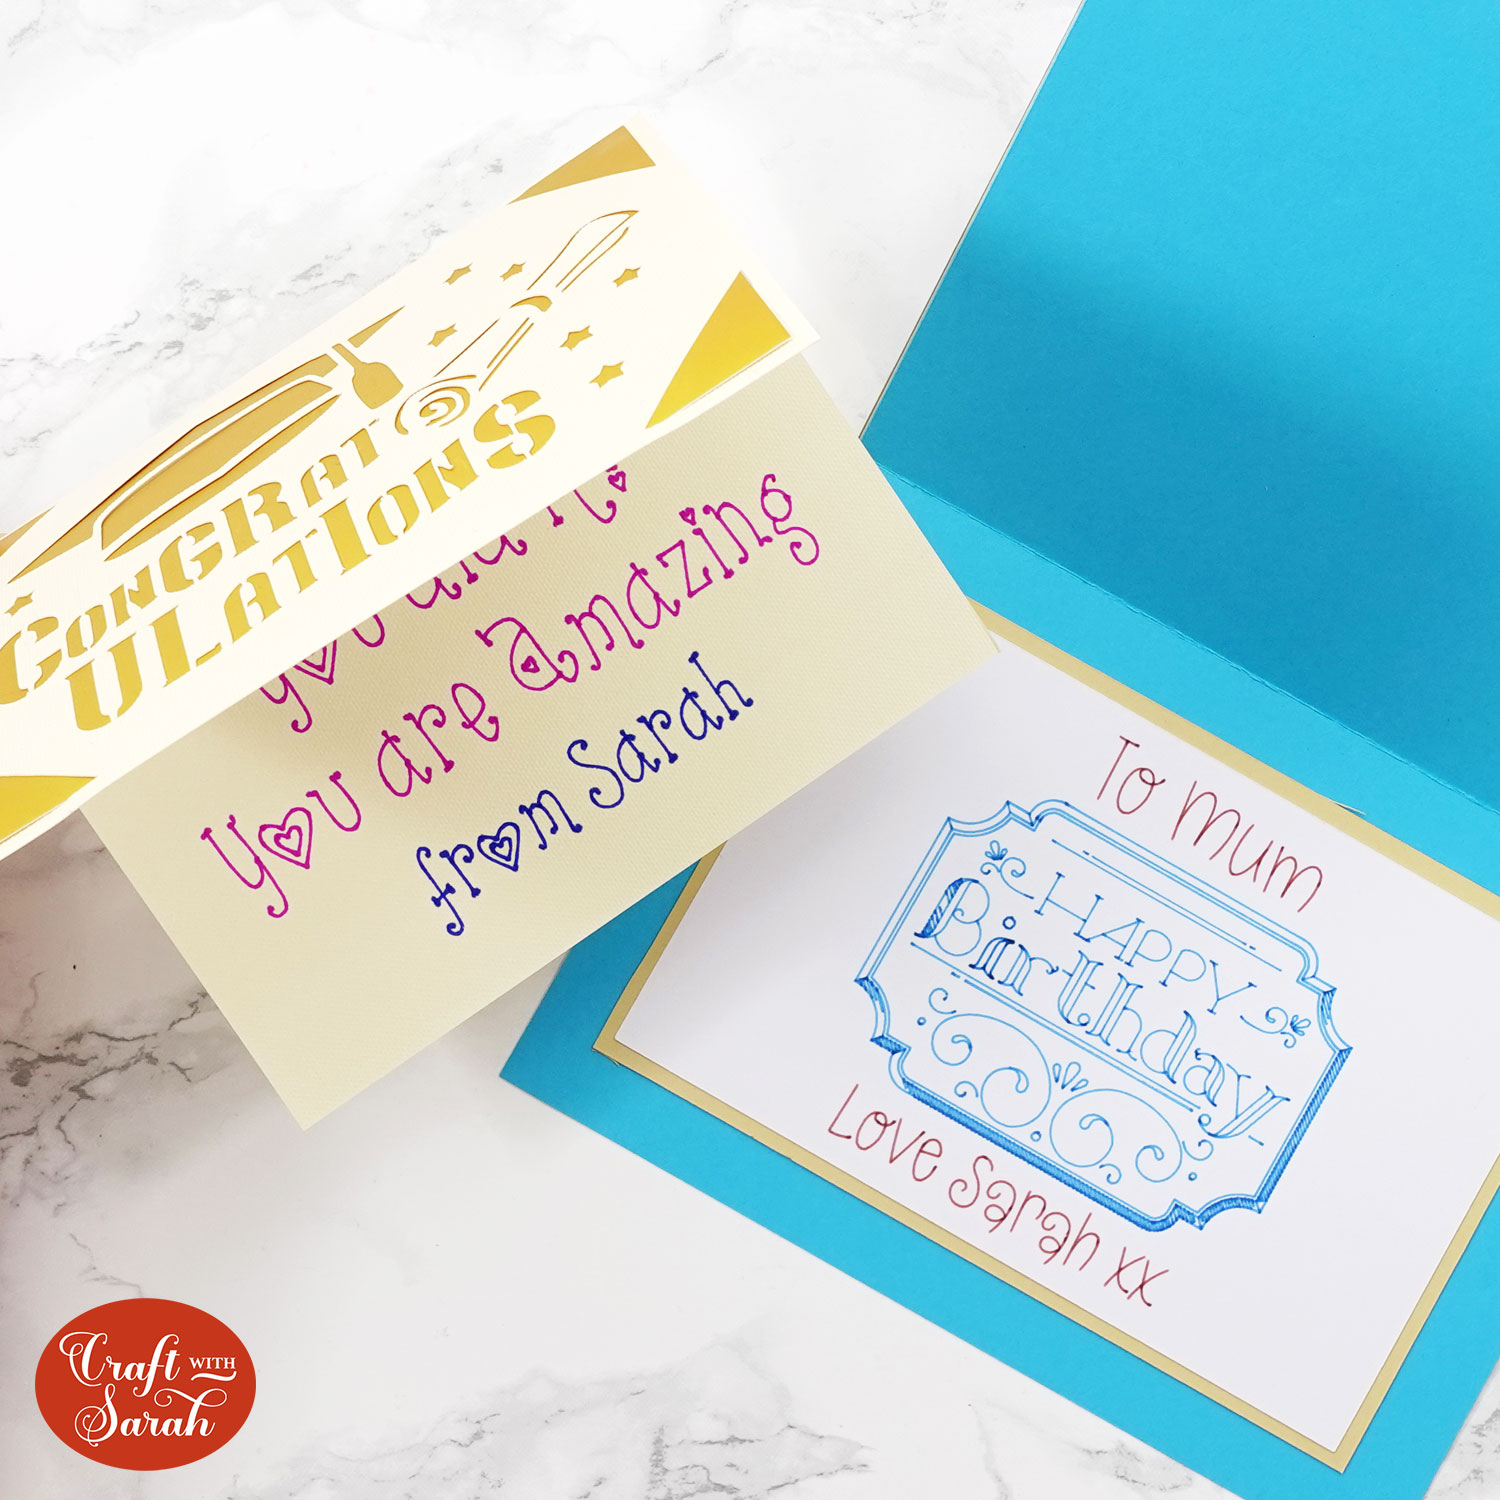 How to Write Inside Cards with a Cricut